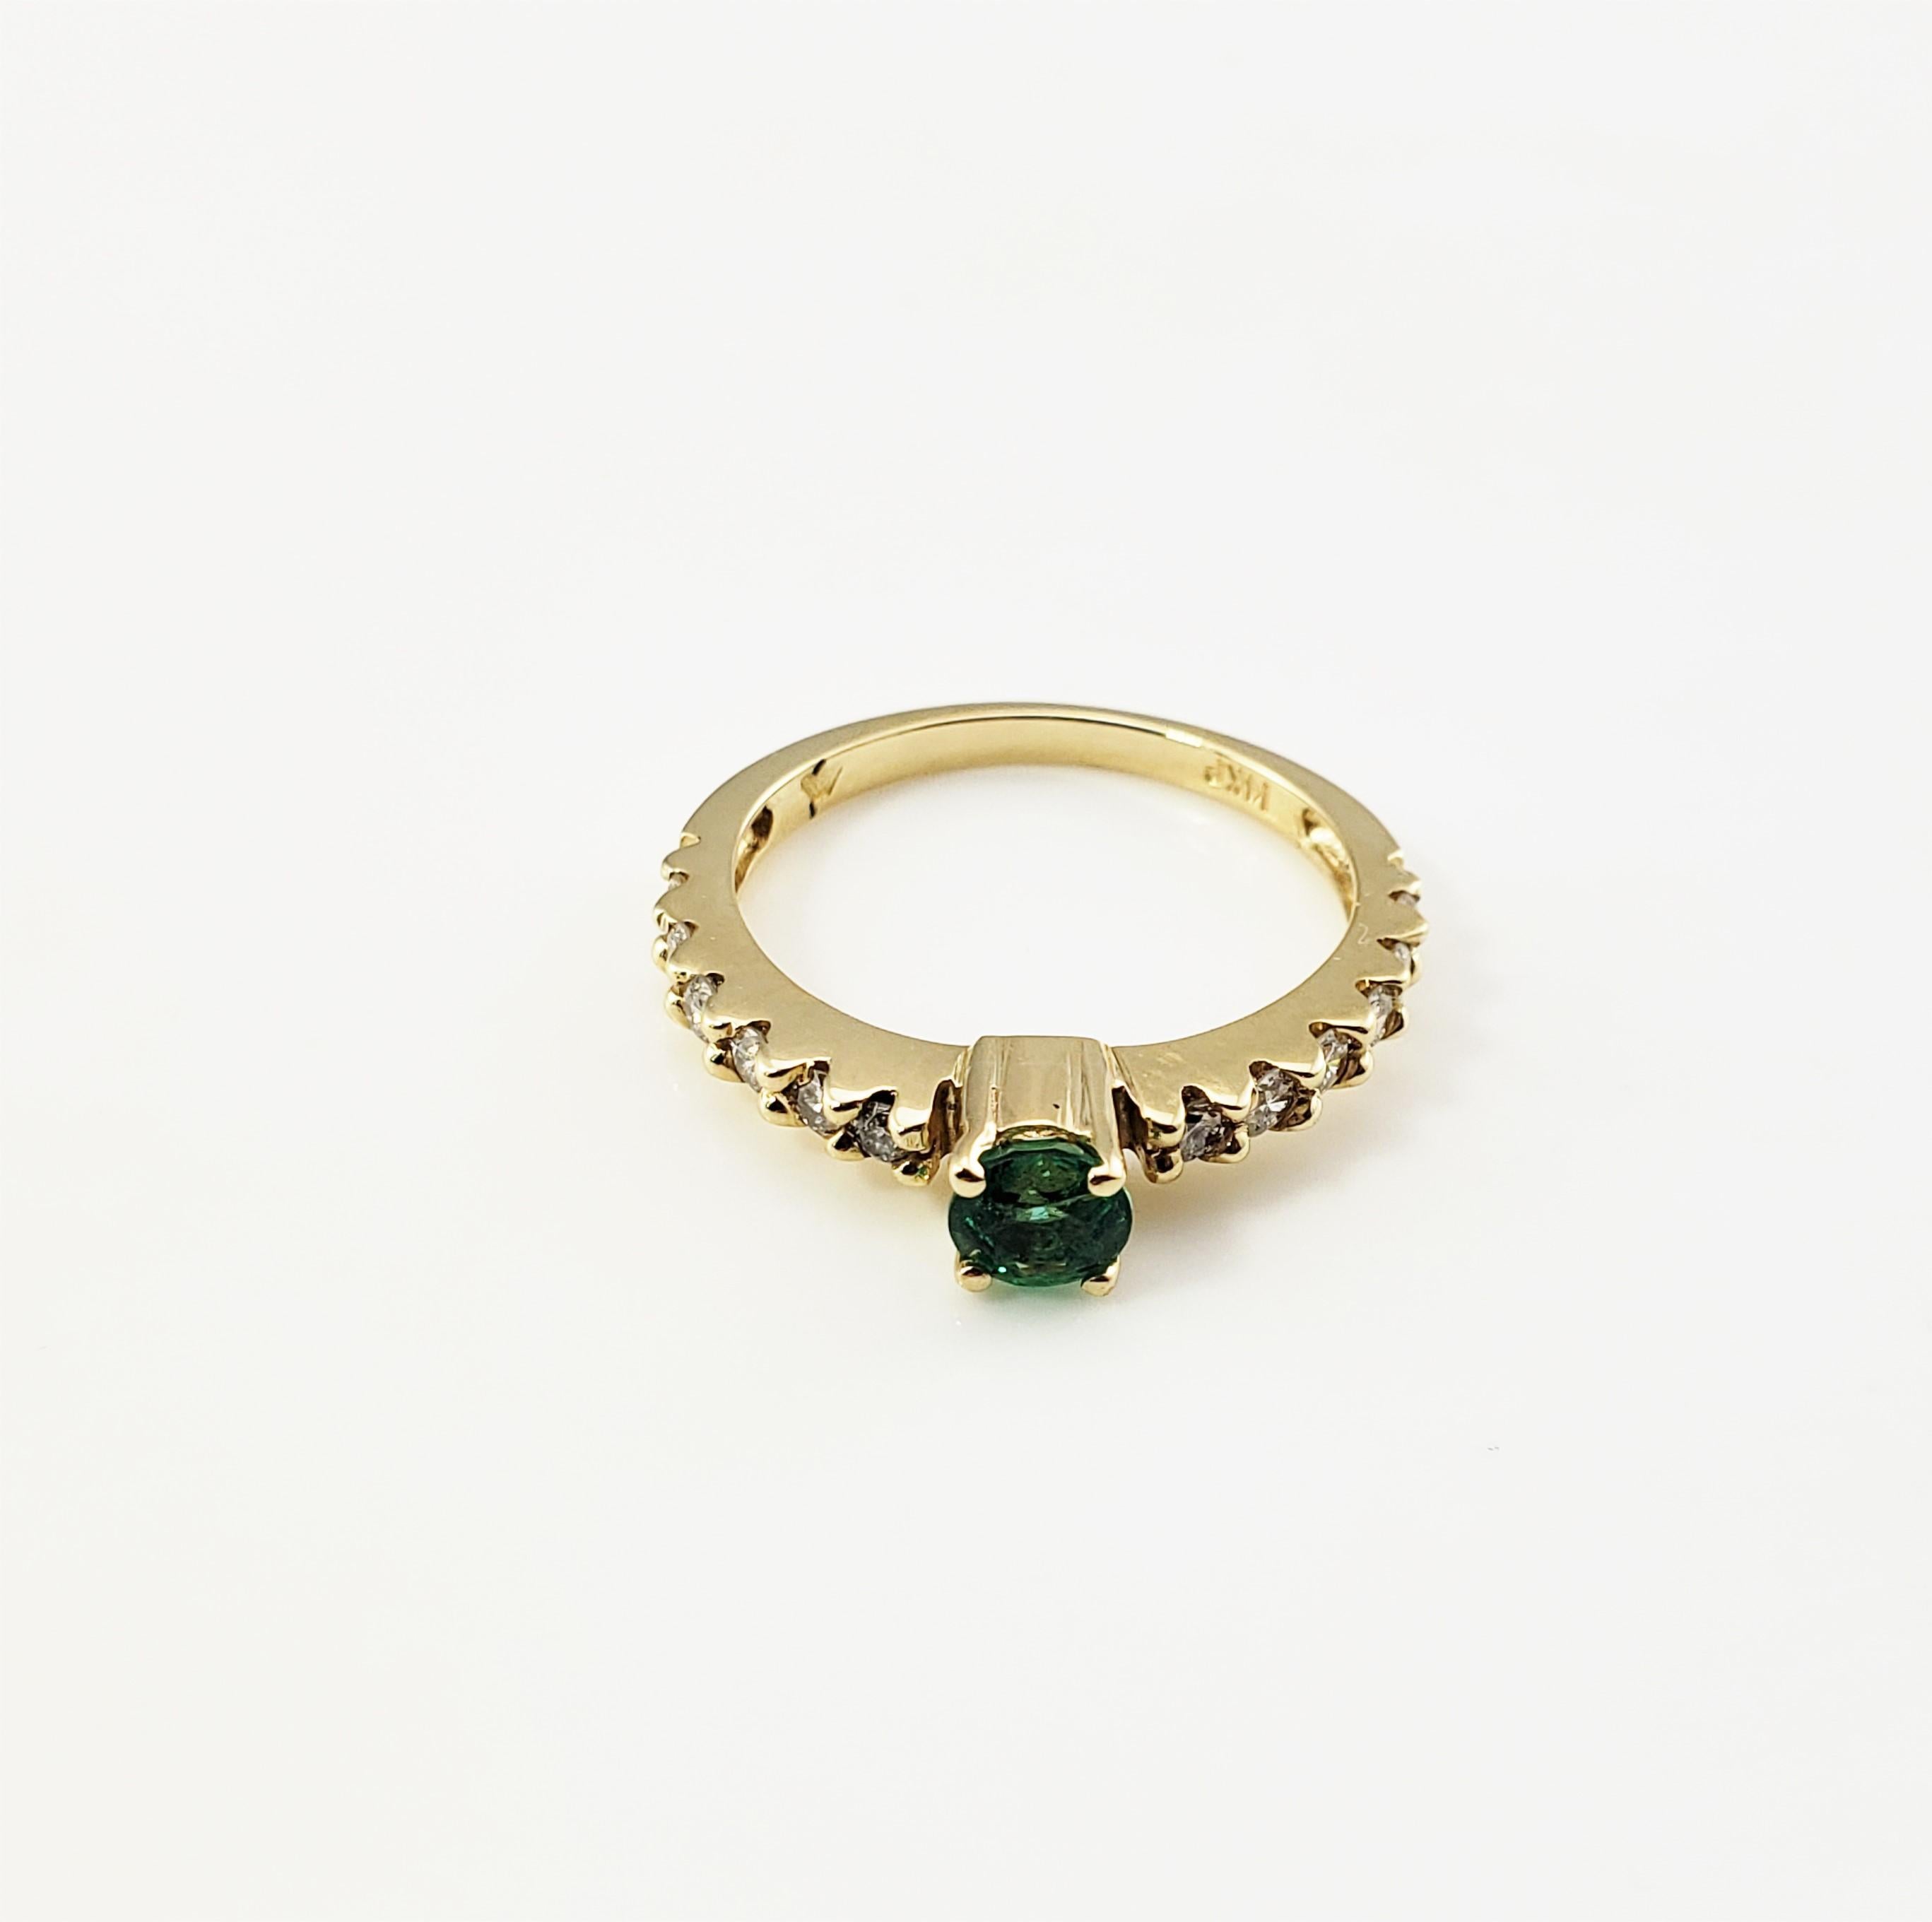 14 Karat Yellow Gold Emerald and Diamond Ring Size 6.75-

This lovely ring features one round emerald (5 mm) and 12 round brilliant cut diamonds set in classic 14K yellow gold.  Shank: 1.5 mm.

Approximate total diamond weight:  .36 ct.

Diamond